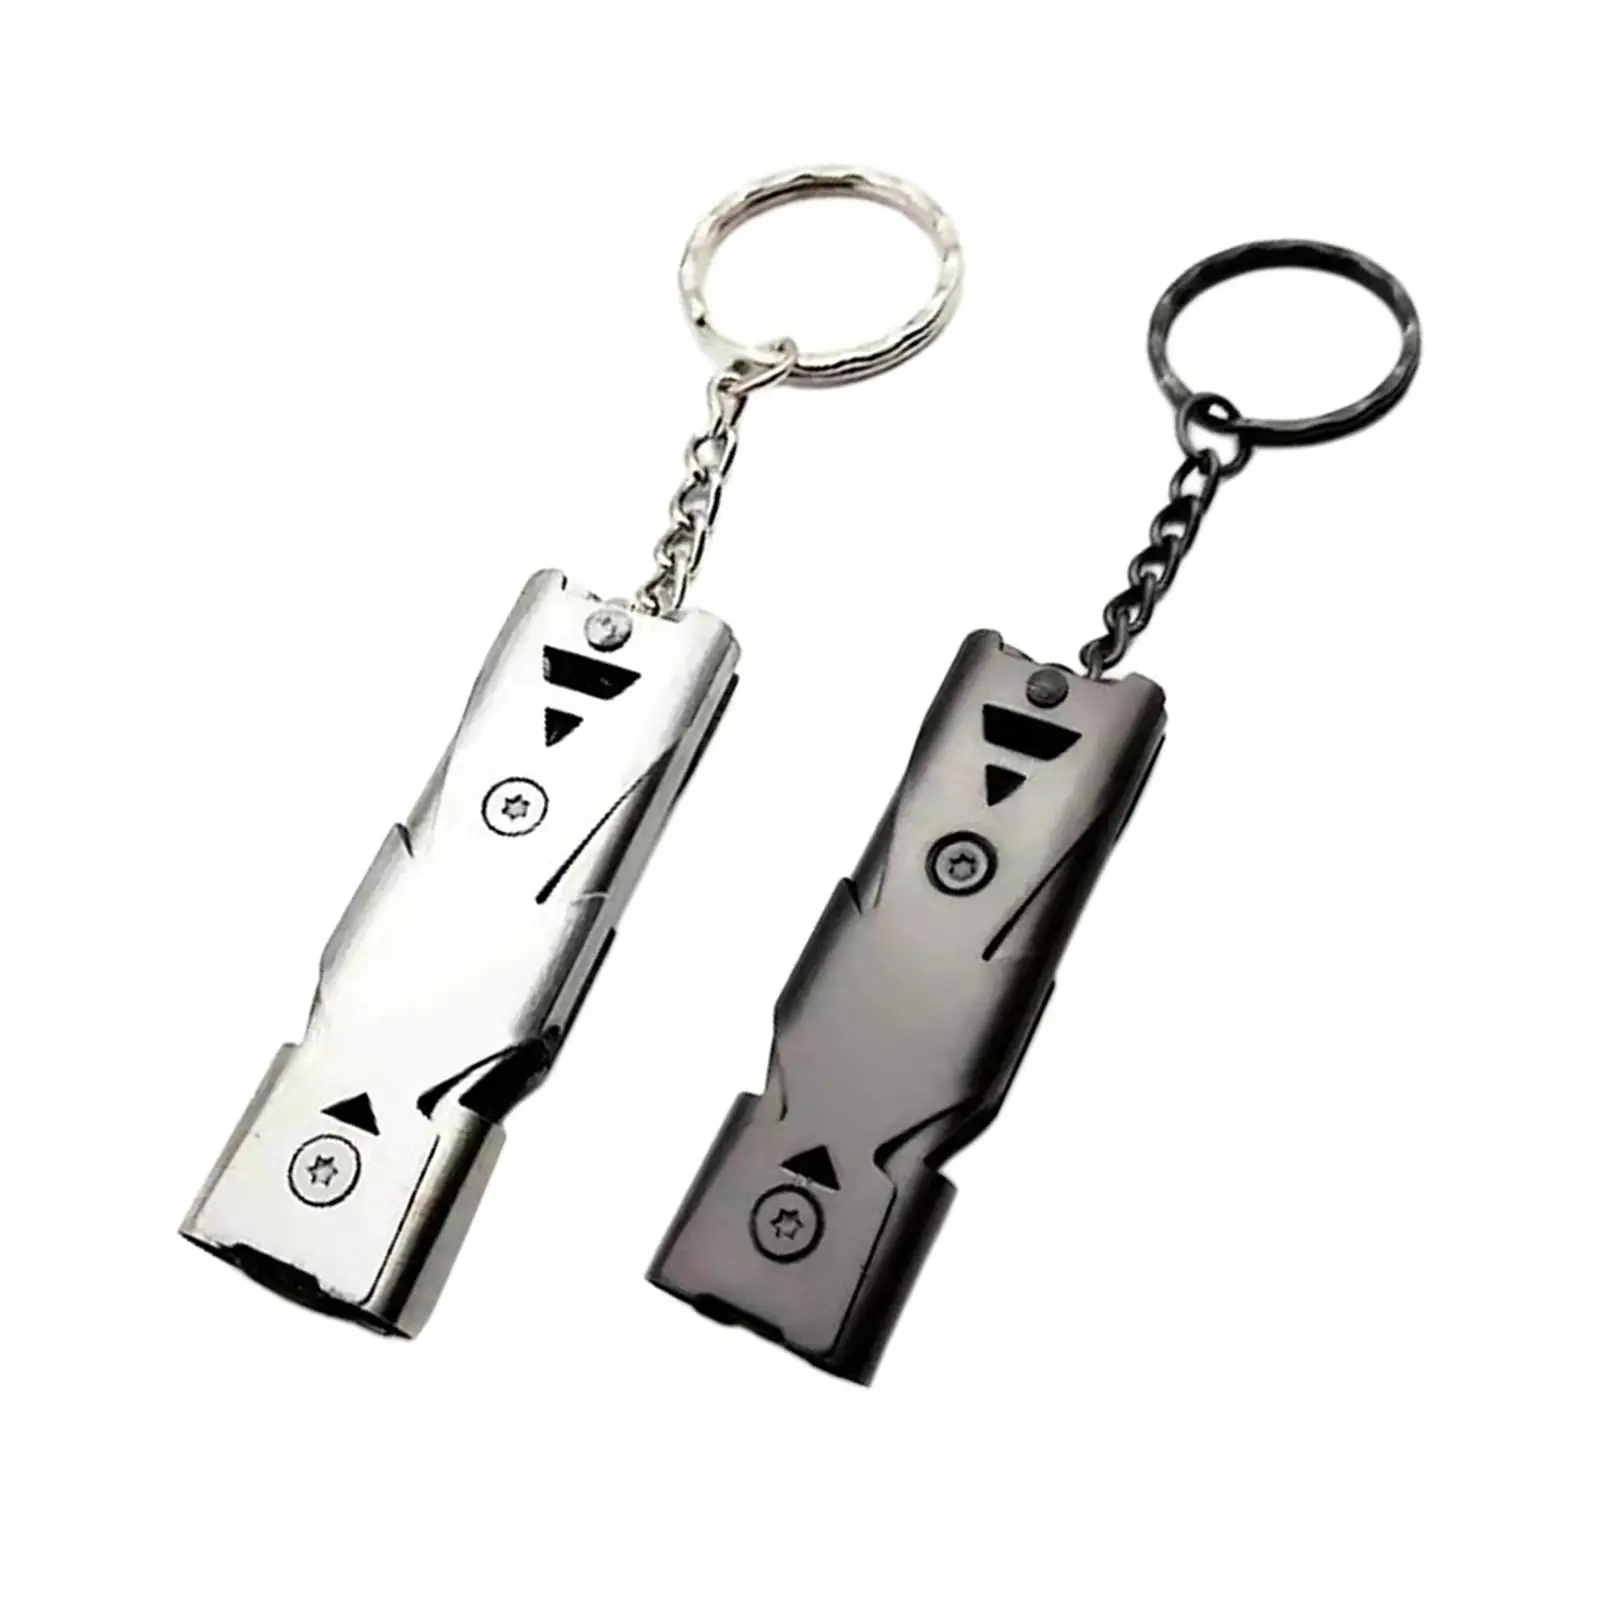 Portable Emergency Whistle, Double Tube with Key Chain High Decibel Equipment Accessory for Outdoor